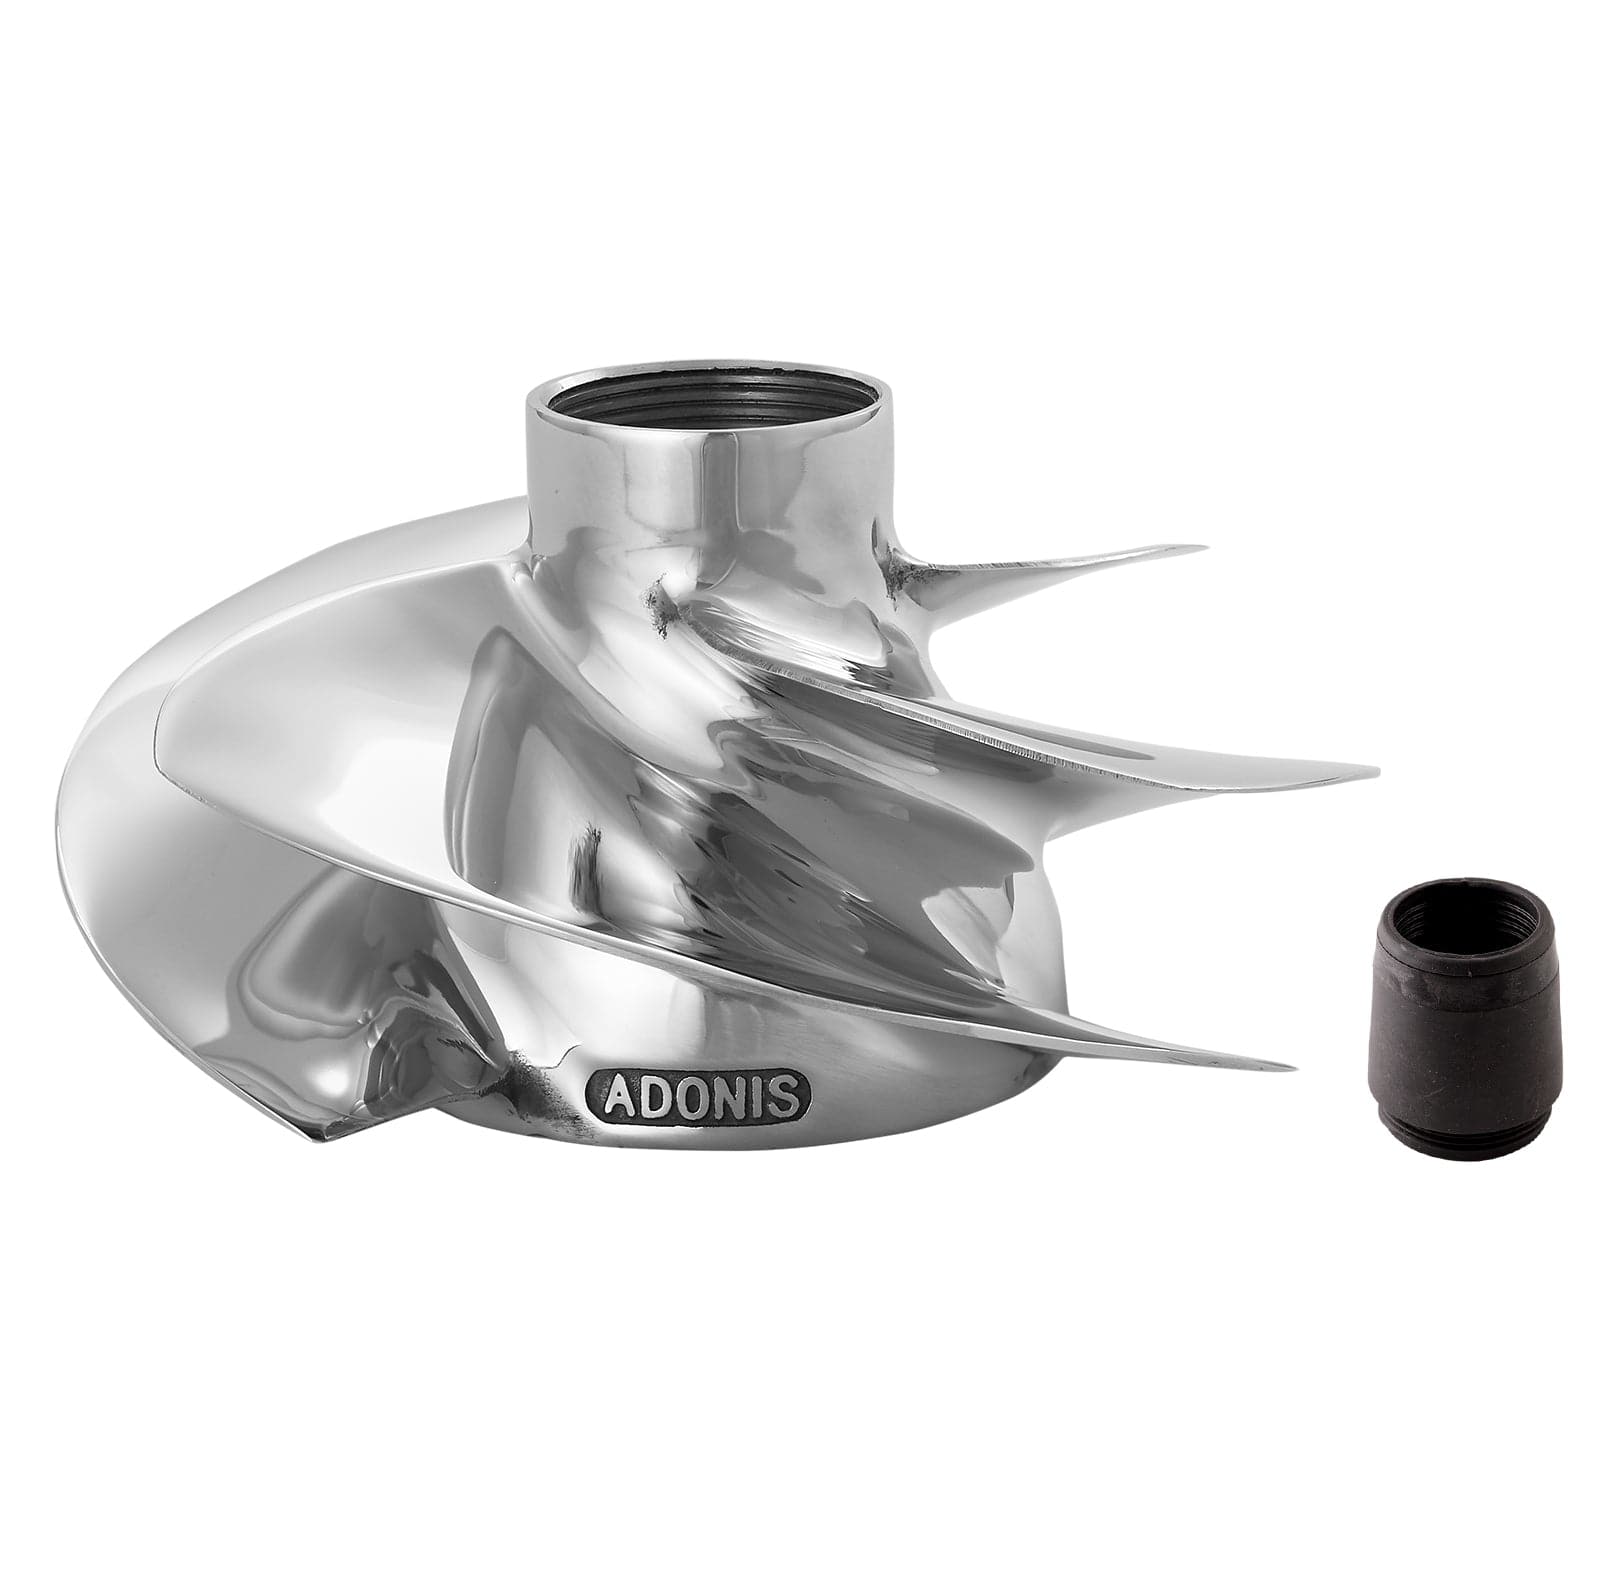 Adonis impeller for Sea-Doo 2008 RXT X 255/2009 150 Speedster/2009 230 Wake